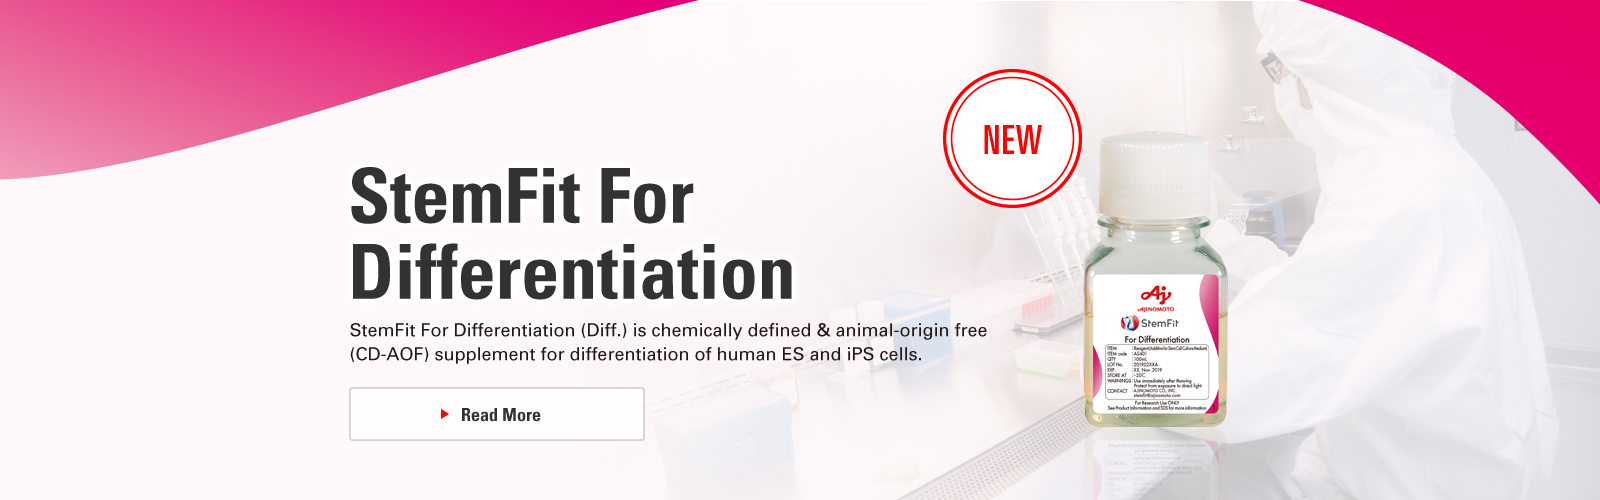 StemFit For Differentiation StemFit For Differentiation (Diff.) is chemically defined & animal-origin free (CD-AOF) supplement for differentiation of human ES and iPS cells. NEW Read More